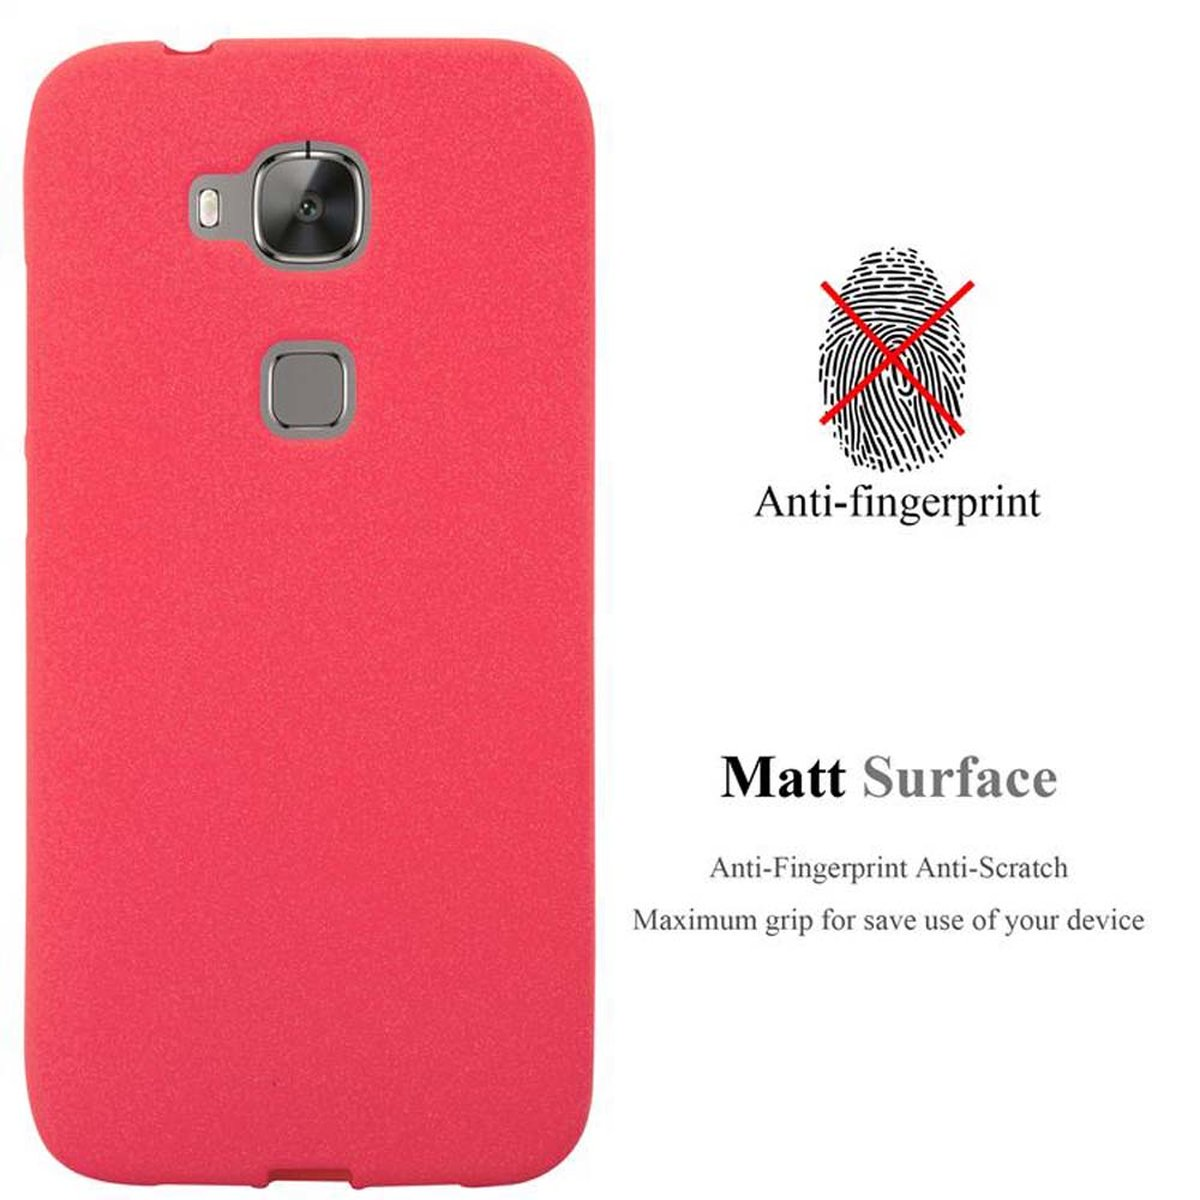 / PLUS Schutzhülle, / G7 ASCEND GX8, FROST ROT G8 TPU CADORABO Backcover, Frosted Huawei,